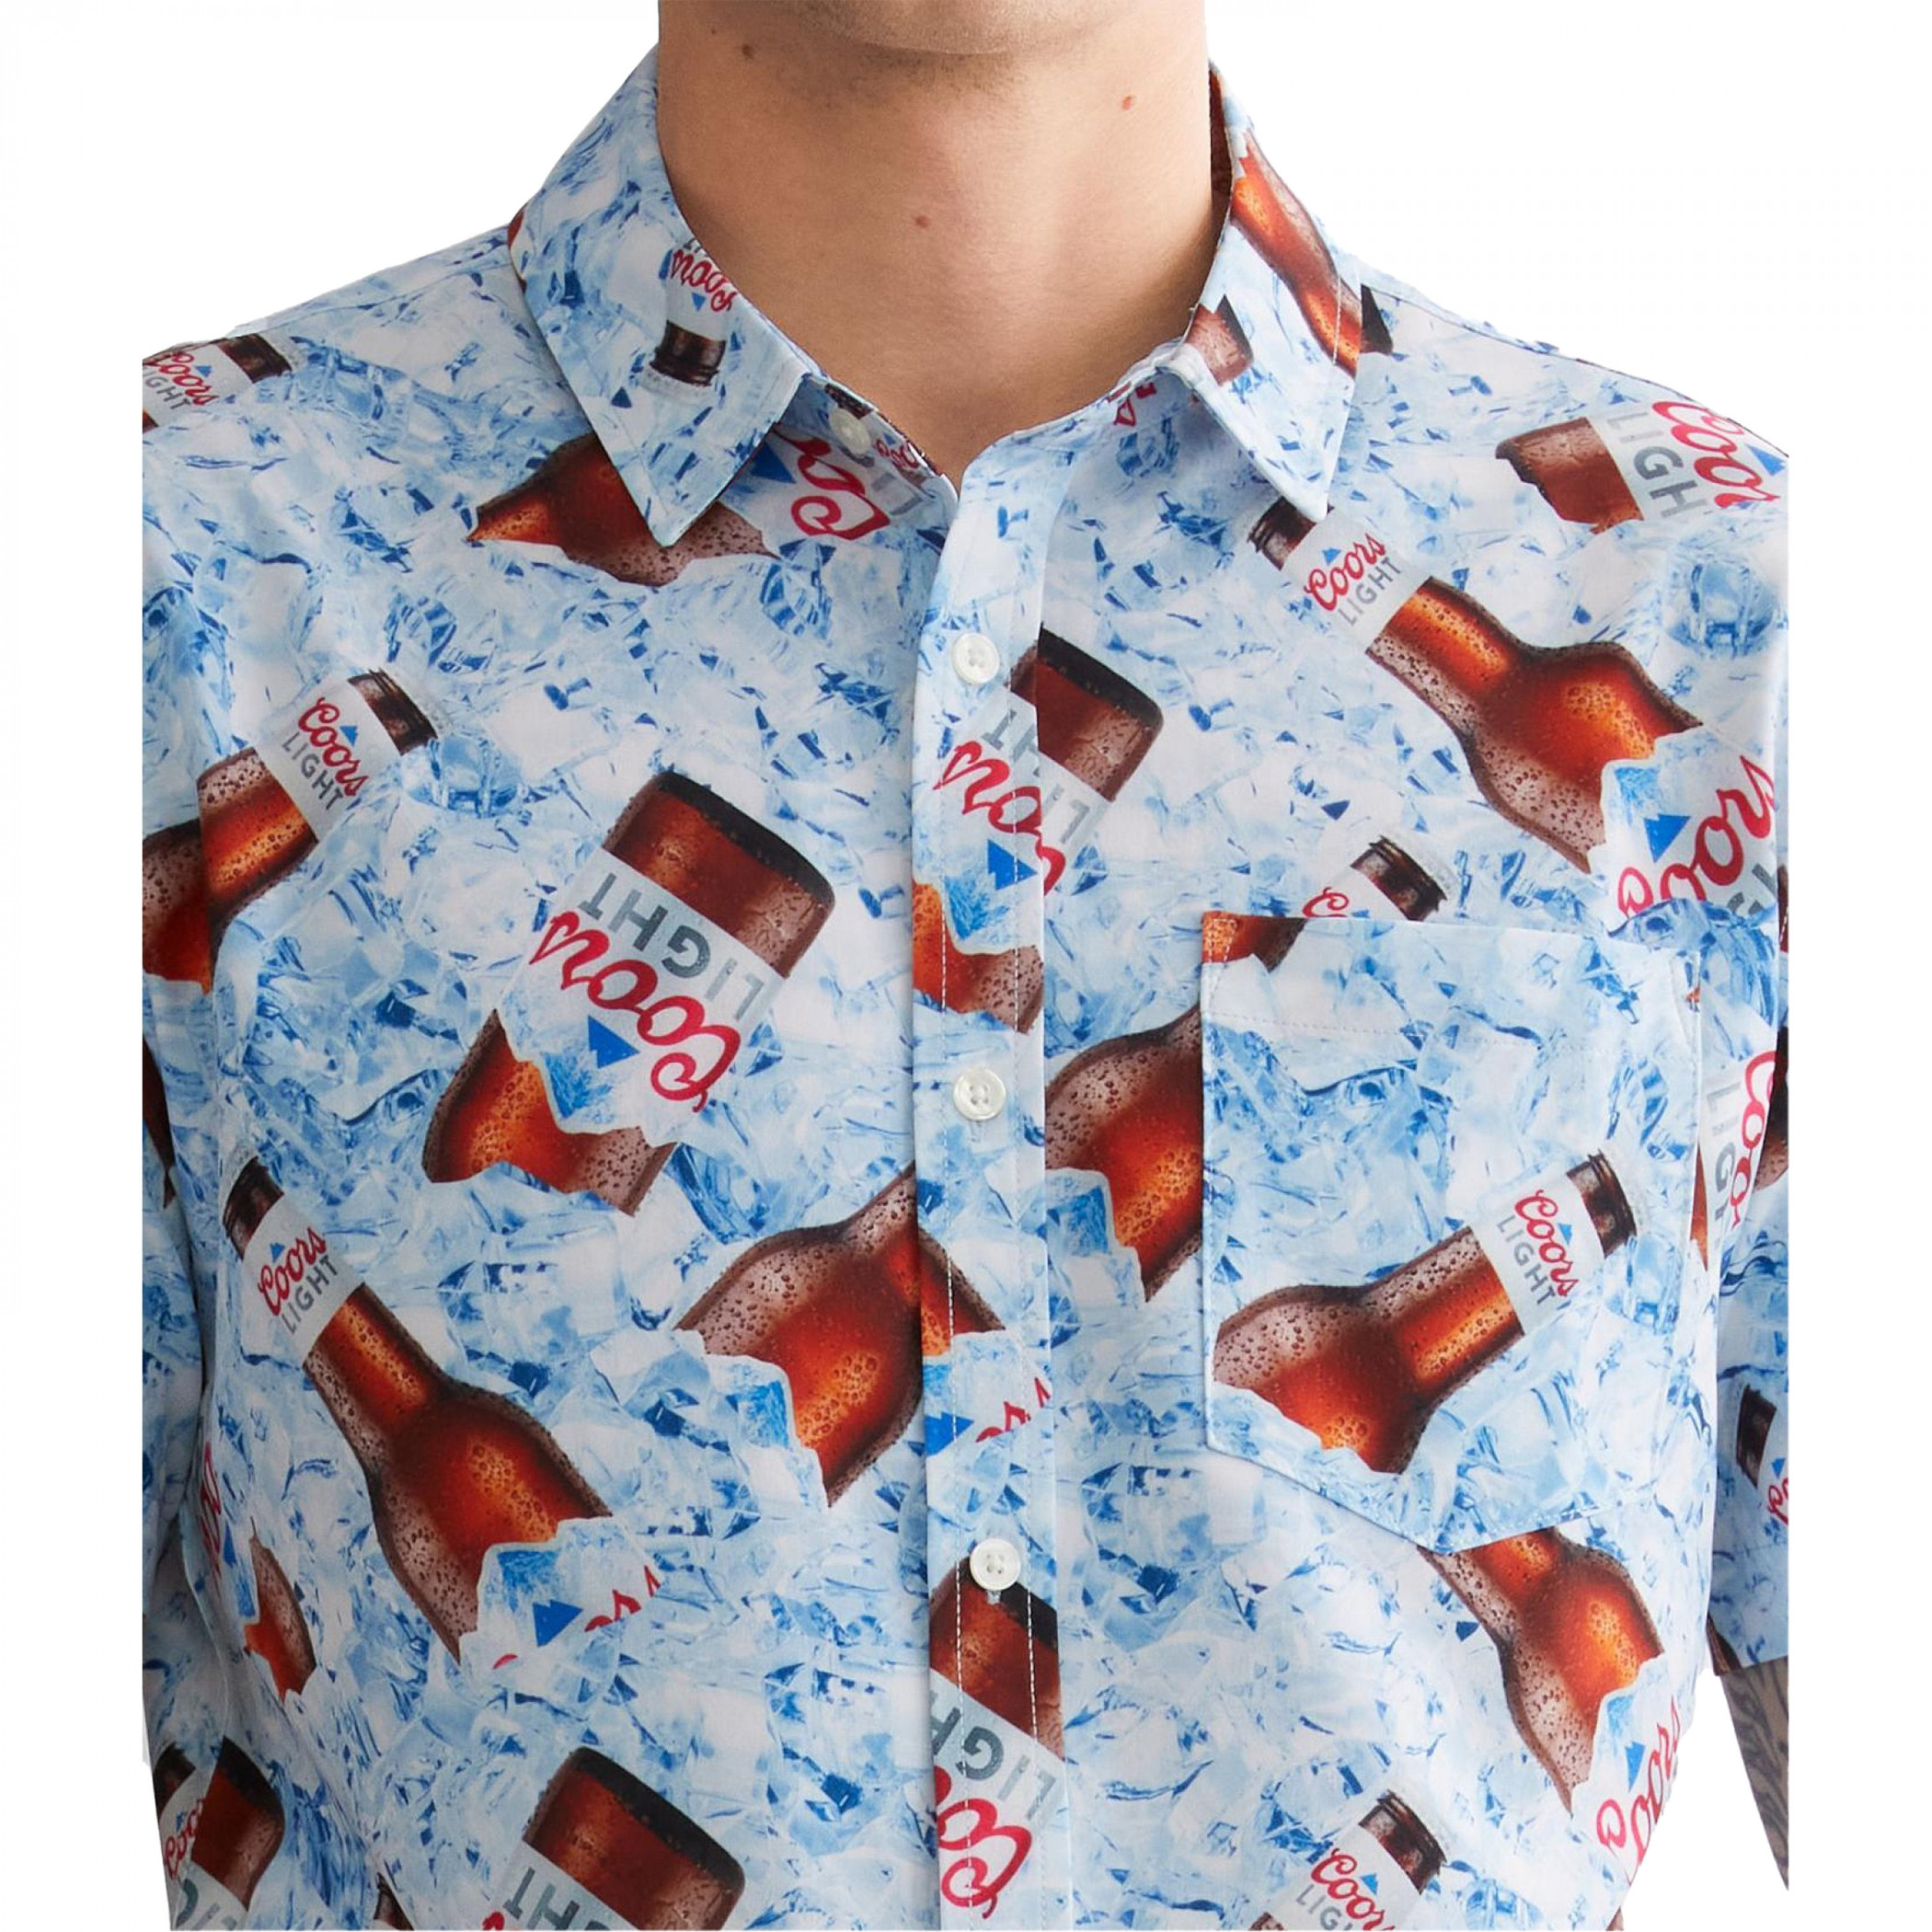 Coors Light Bottles In Ice Button Down Performance Shirt